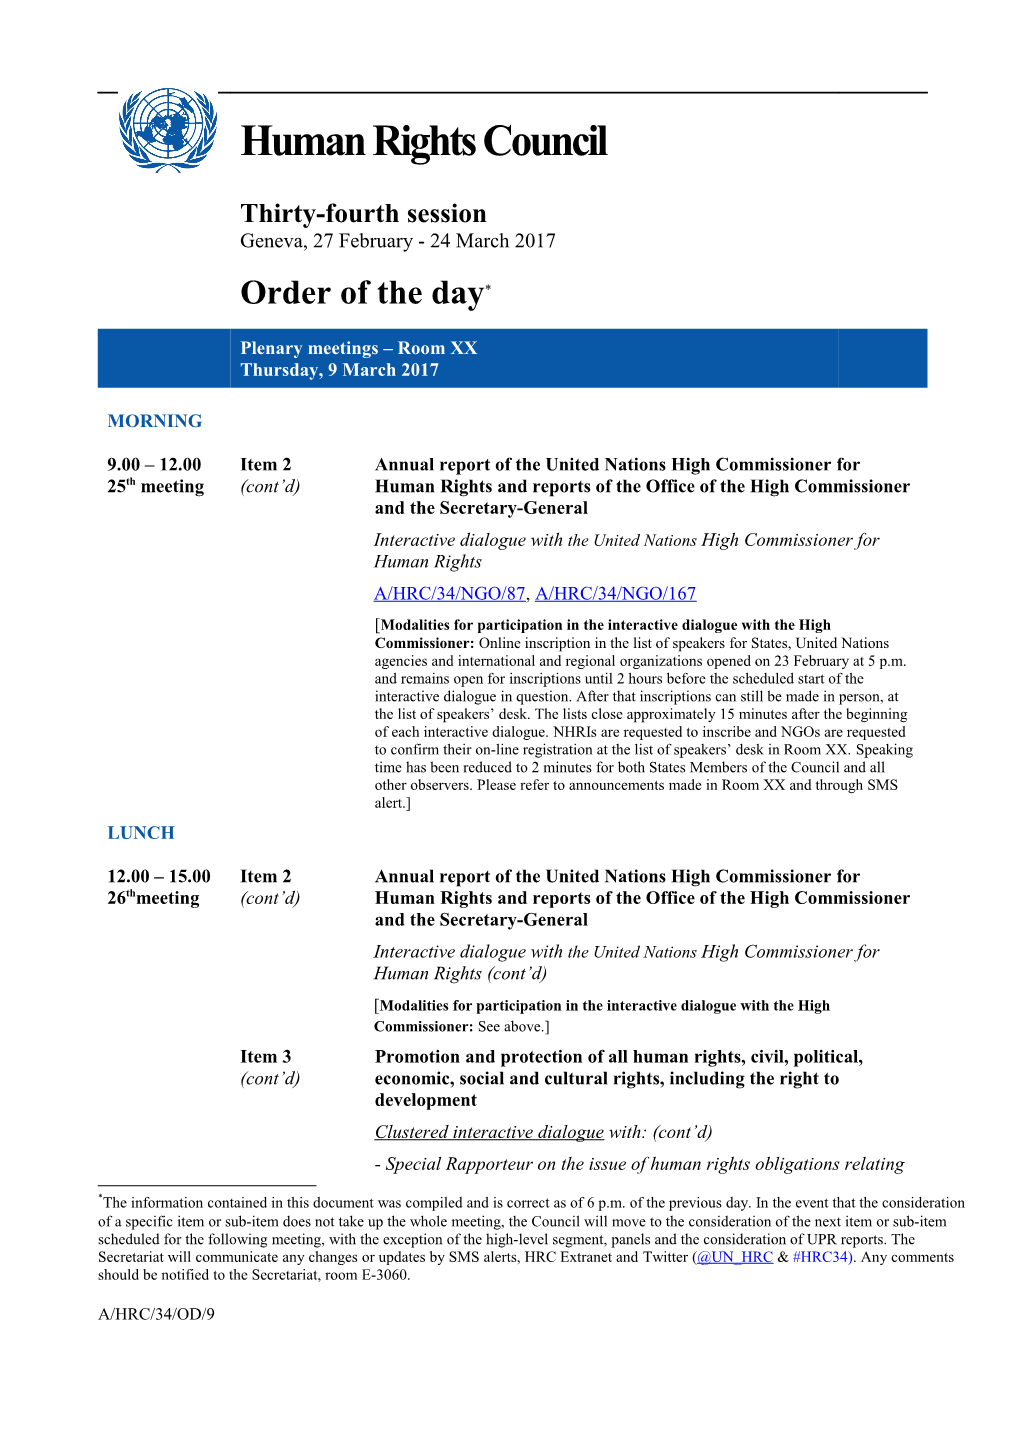 Order of the Day, Thursday, 9 March 2017